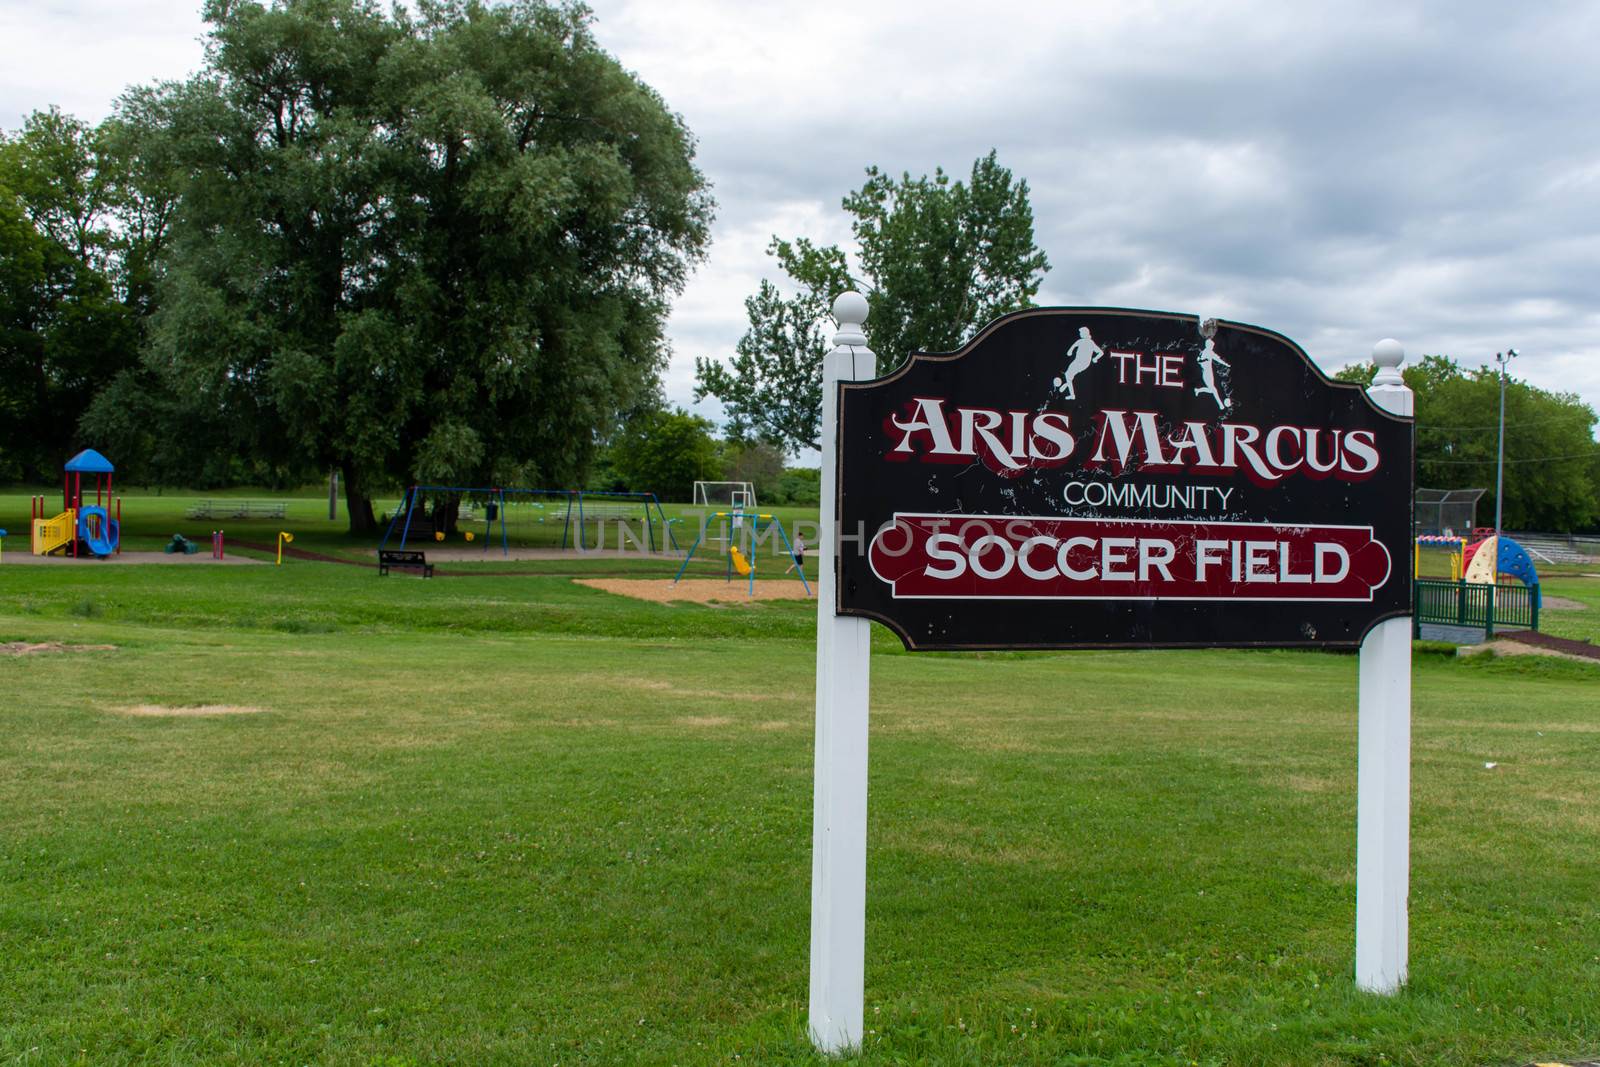 Marcus community soccer field sign for park in a small town Cana by kingmaphotos